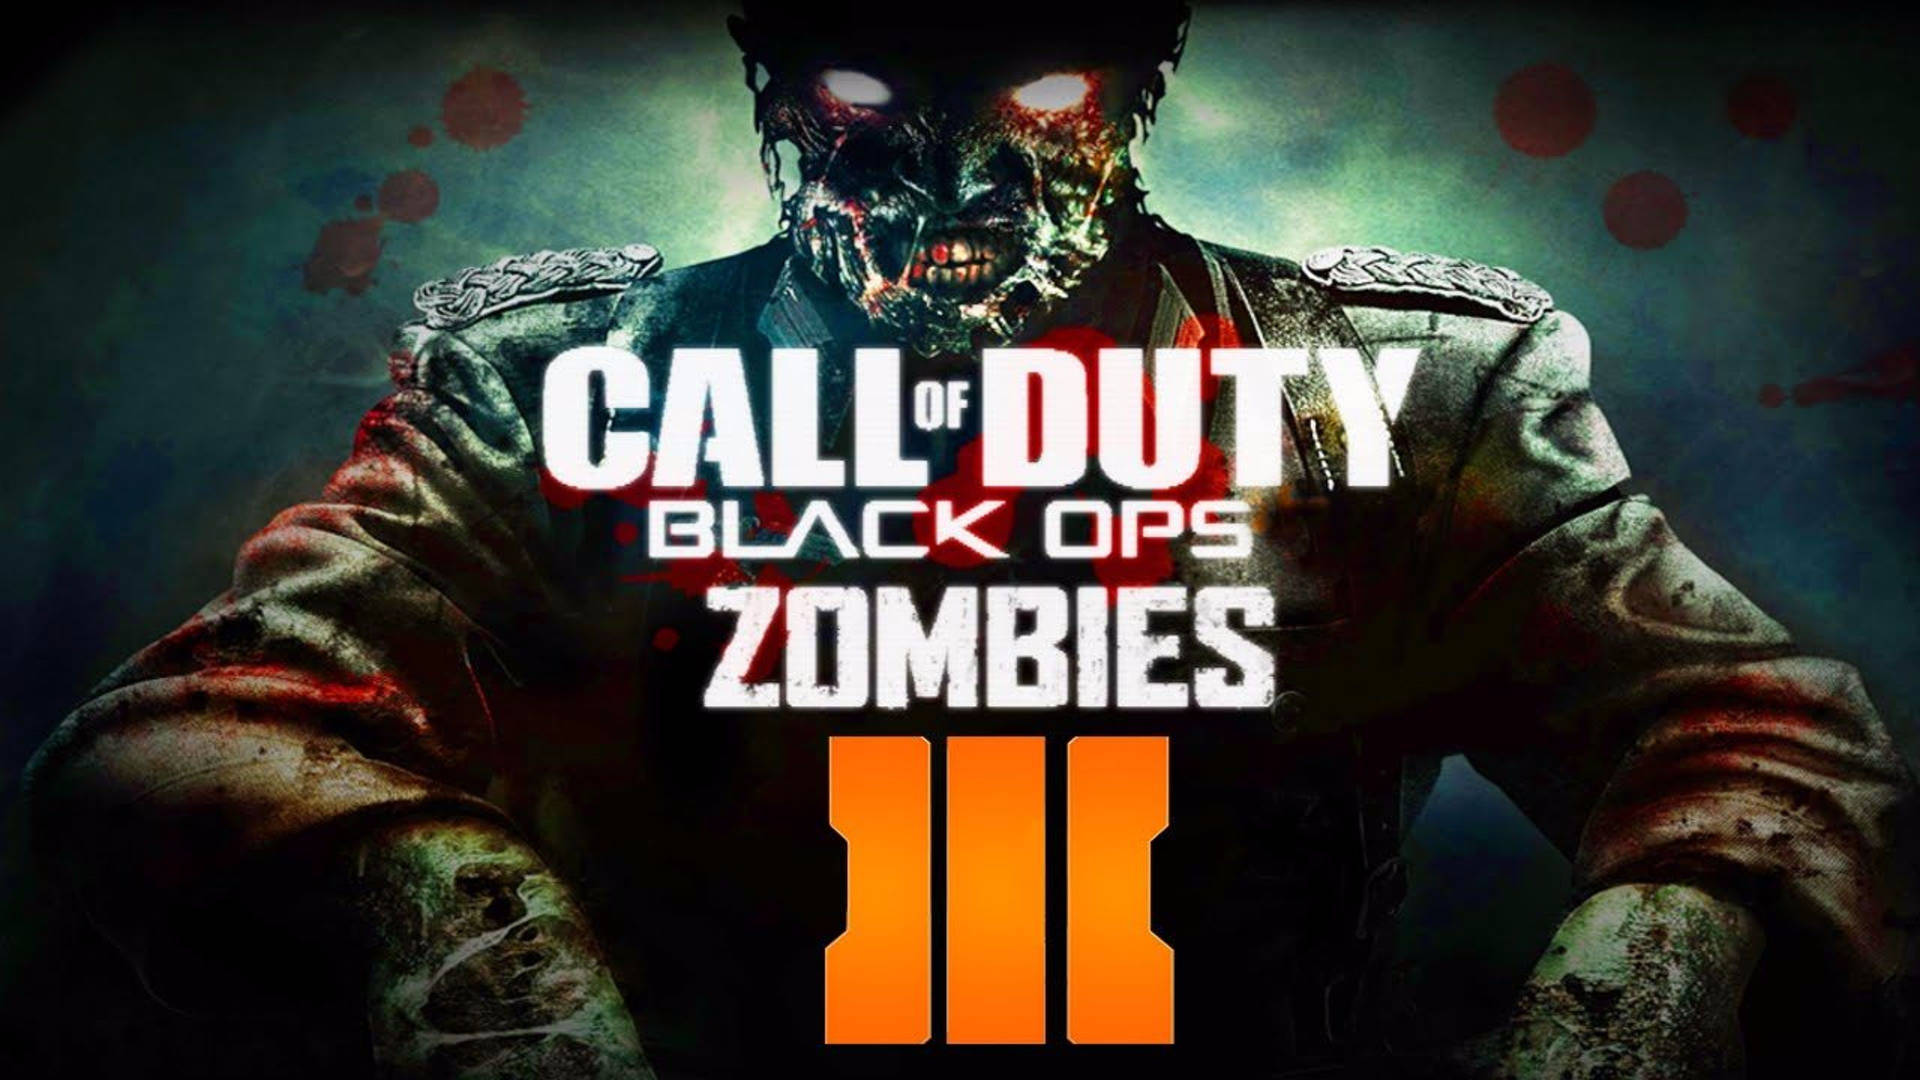 Zombie Call Of Duty Digital Poster Background